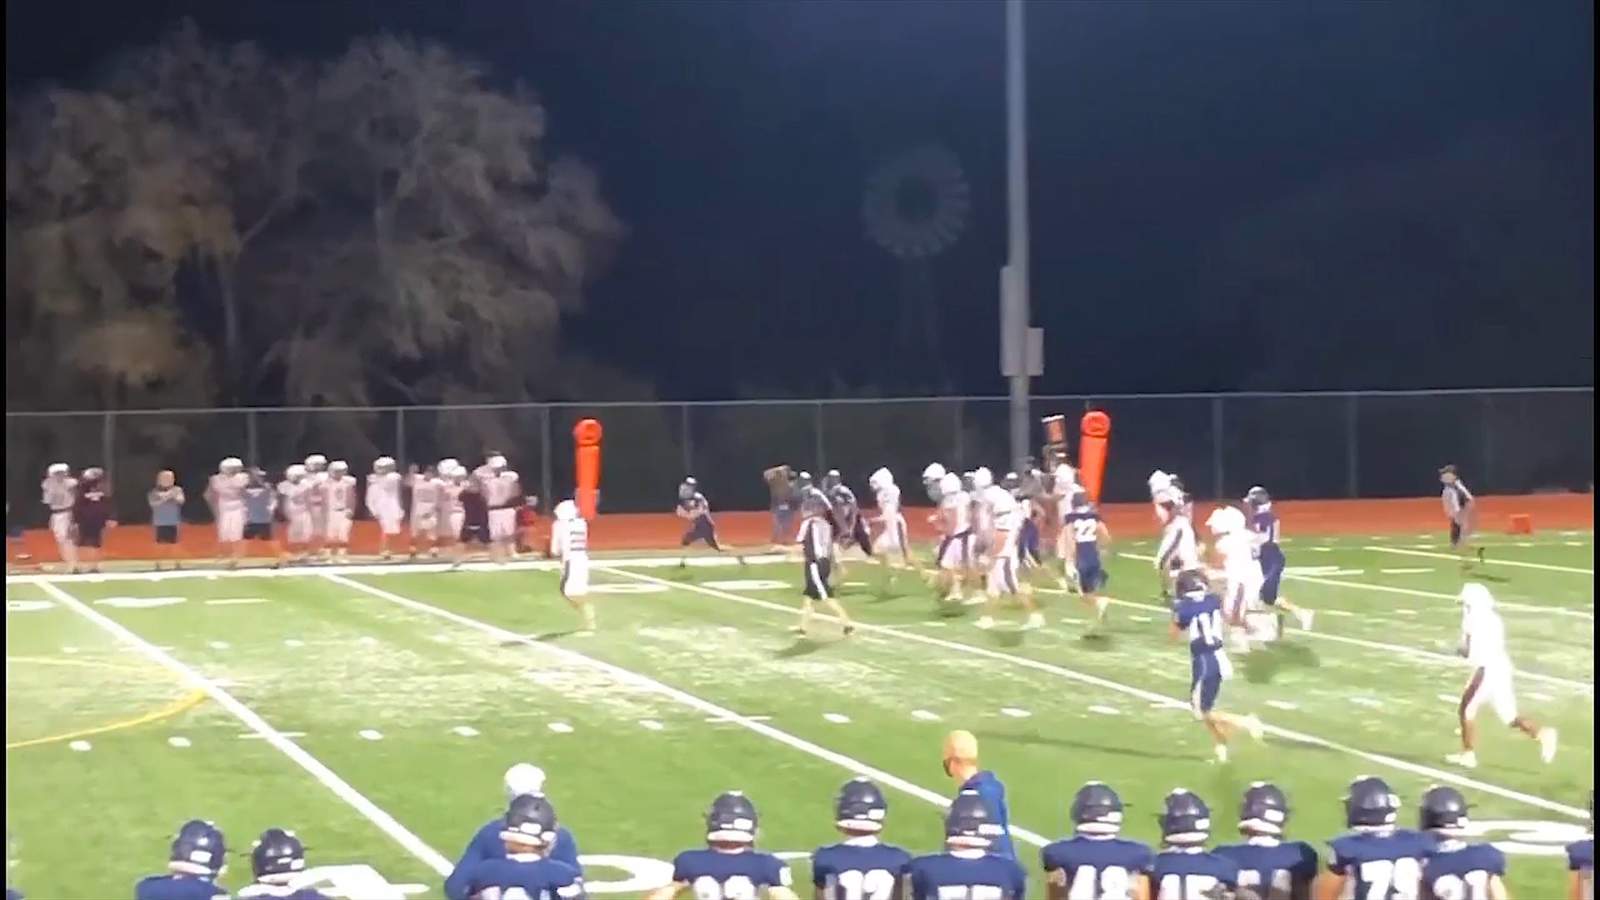 To the house! Boerne Champion HS student with special needs scores 80-yard touchdown